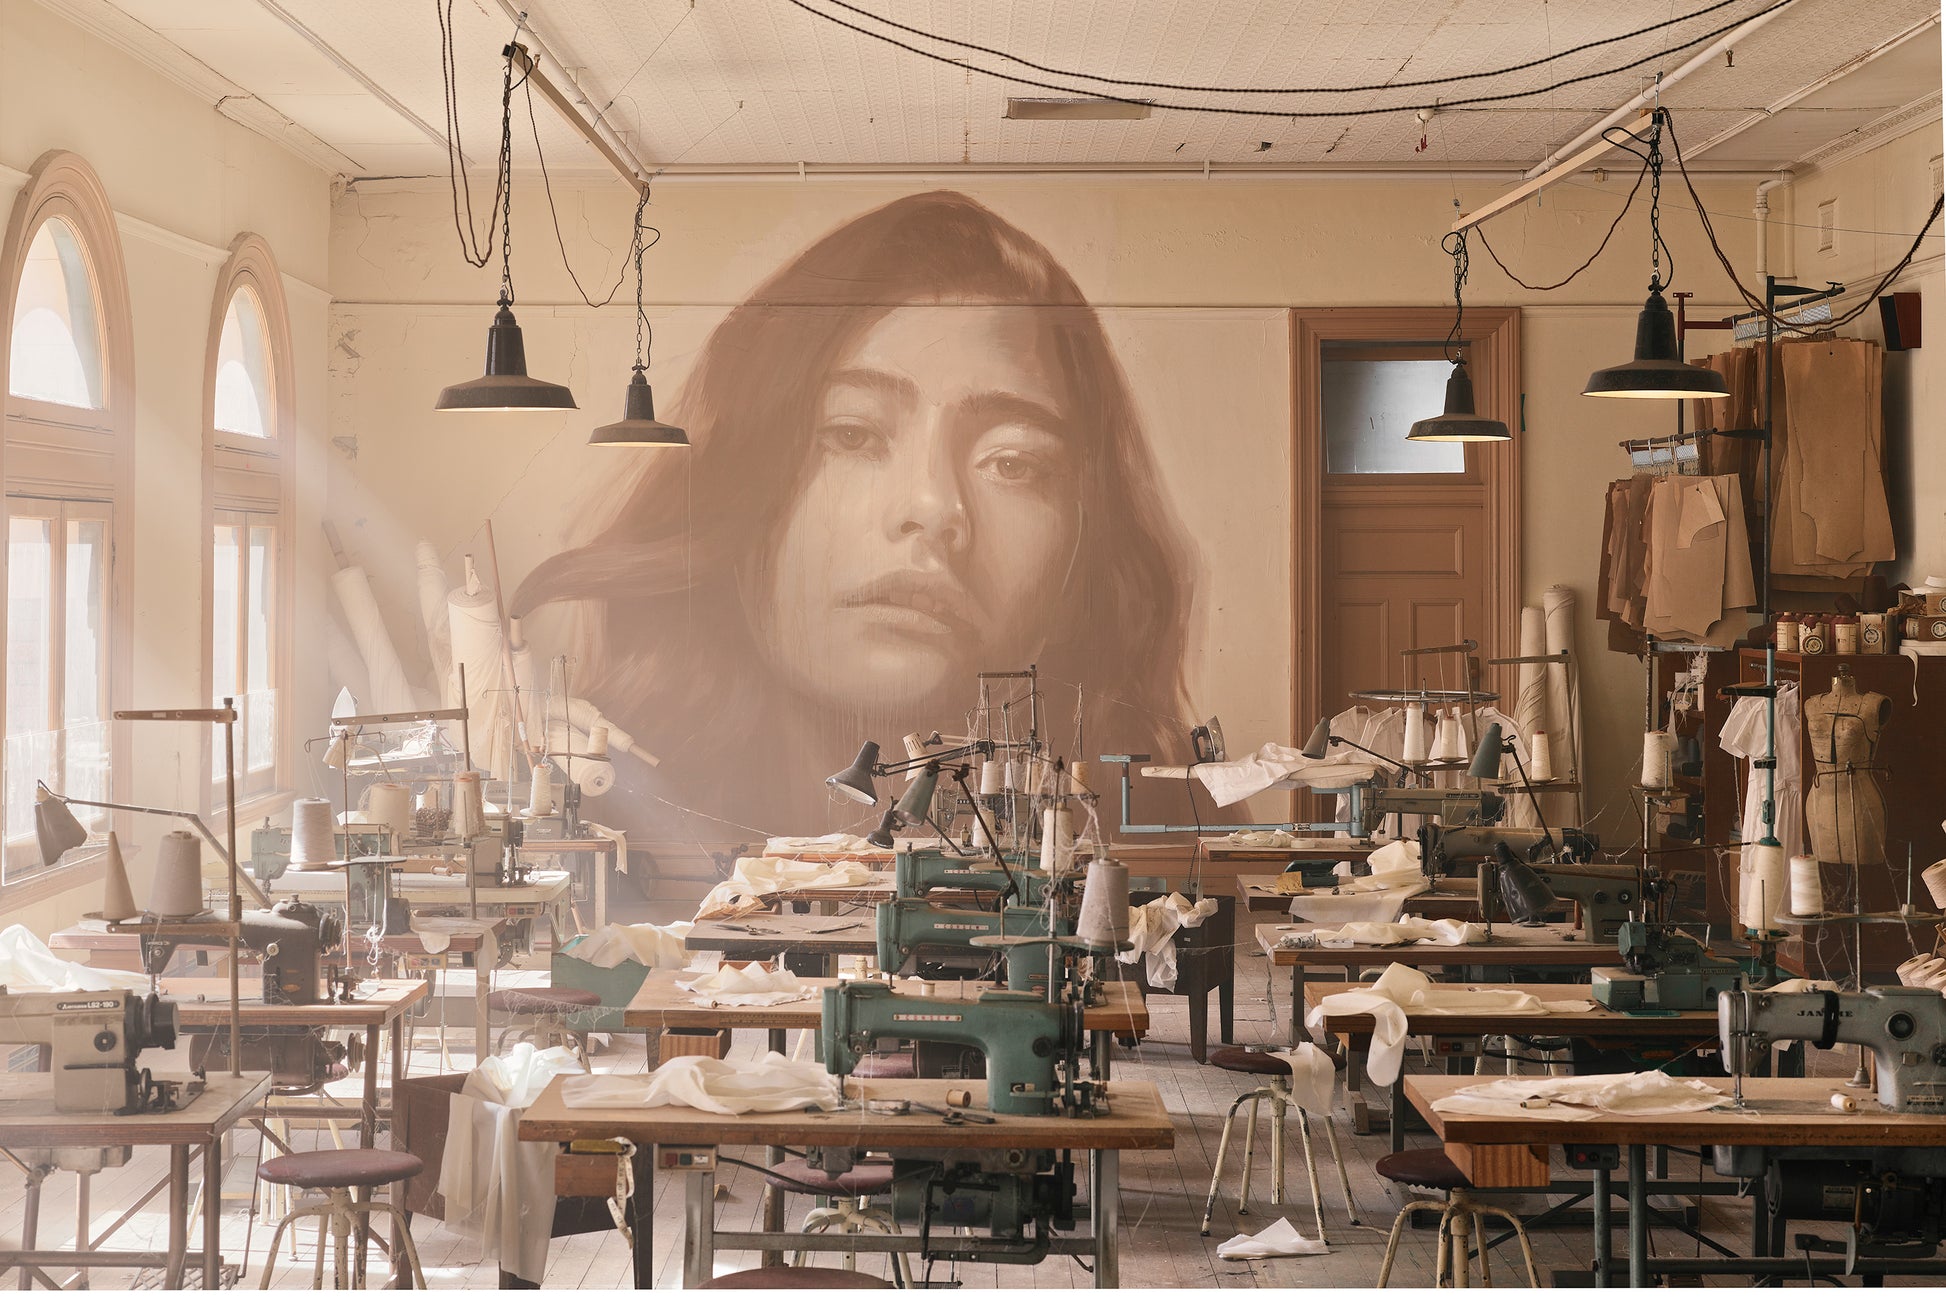 Photographic Print of The Workroom, an installation by Australian Artist Rone at Flinders Street Station. 